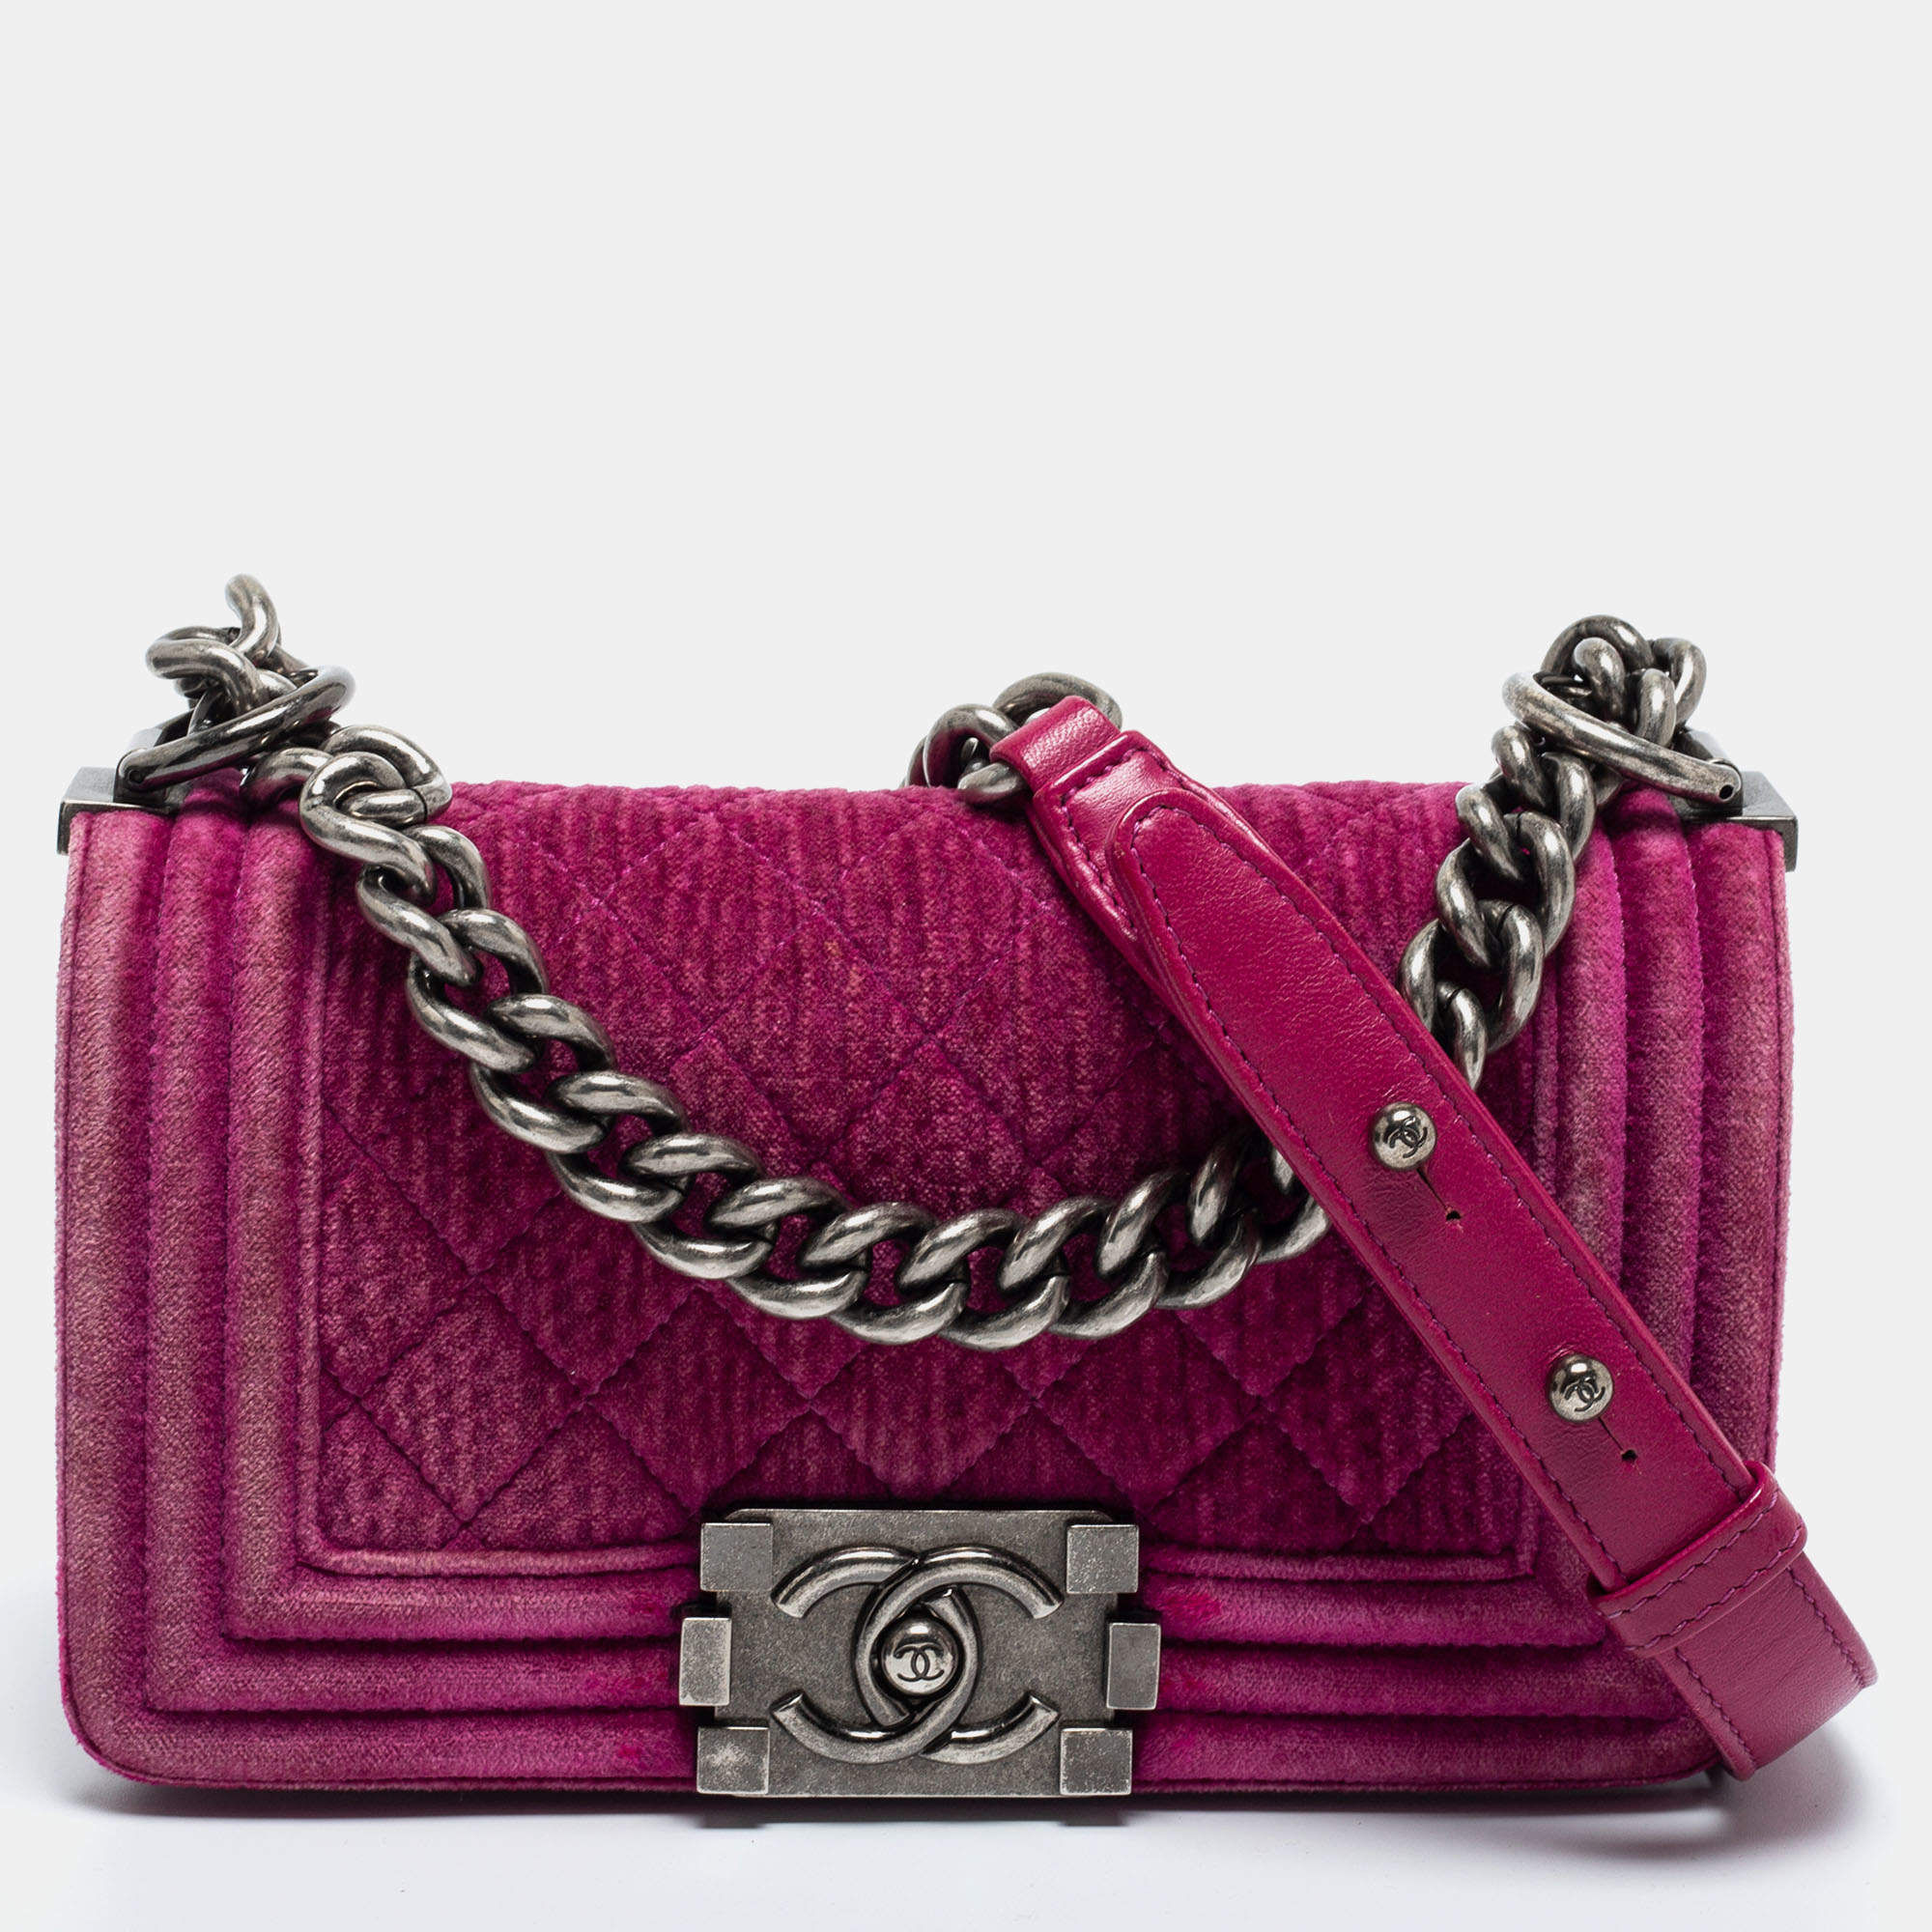 Chanel Pink Quilted Velvet Small Boy Flap Bag Chanel